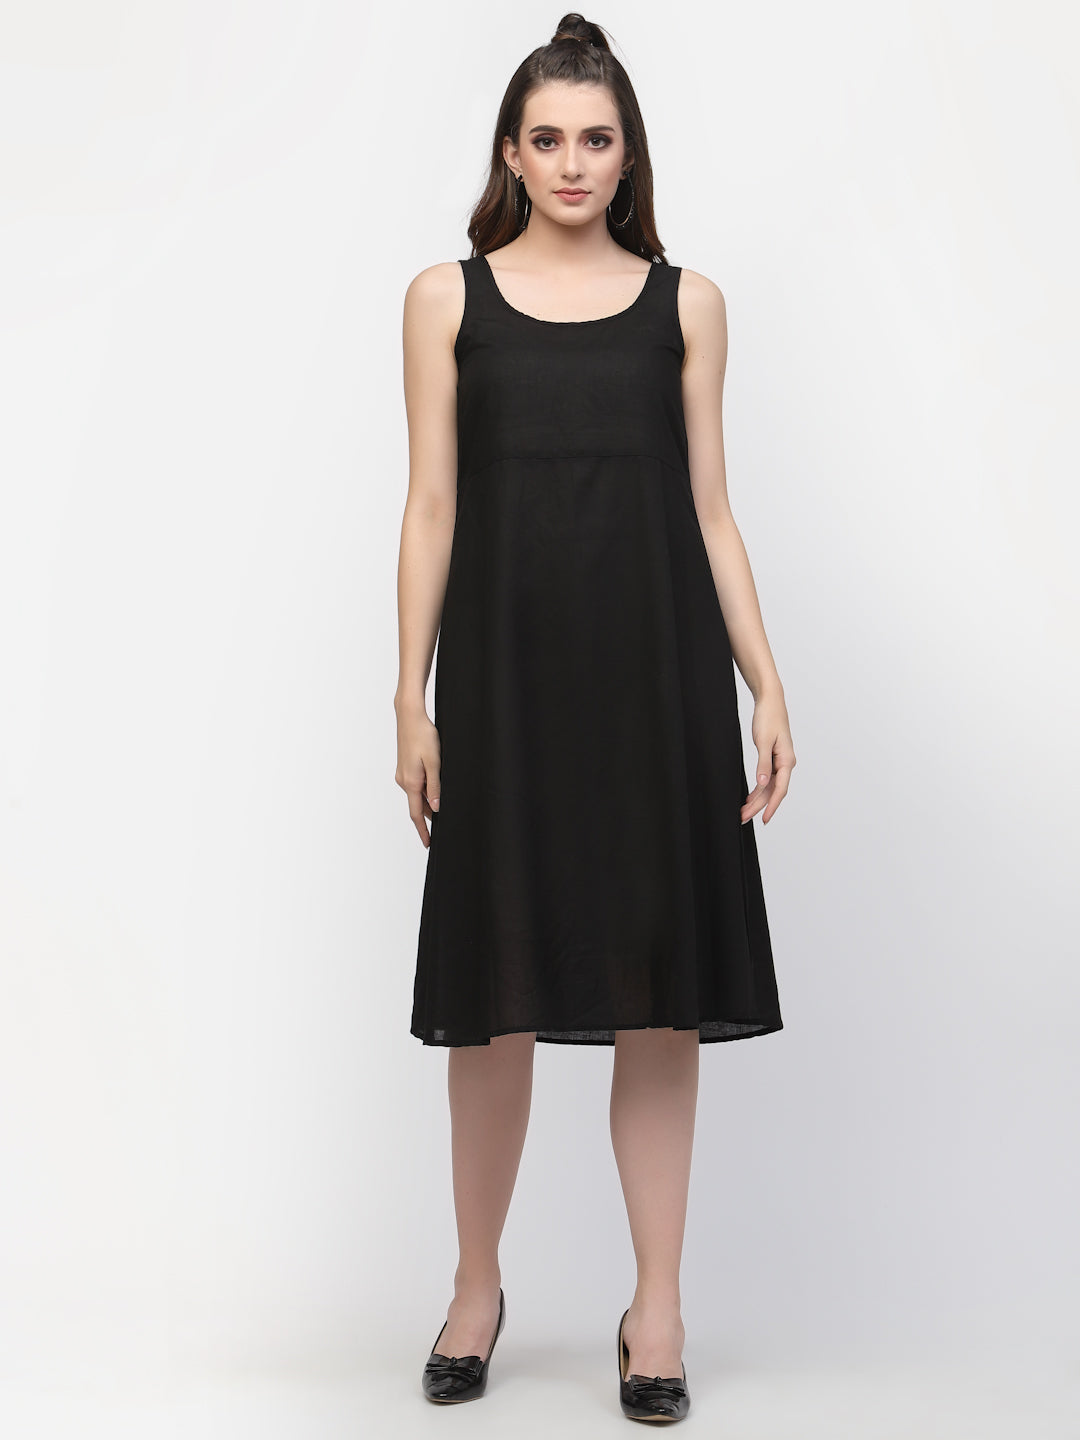 Terquois Black stripes with Tie-Up neck and Three quarter sleeves Dresses Terquois Klothing   